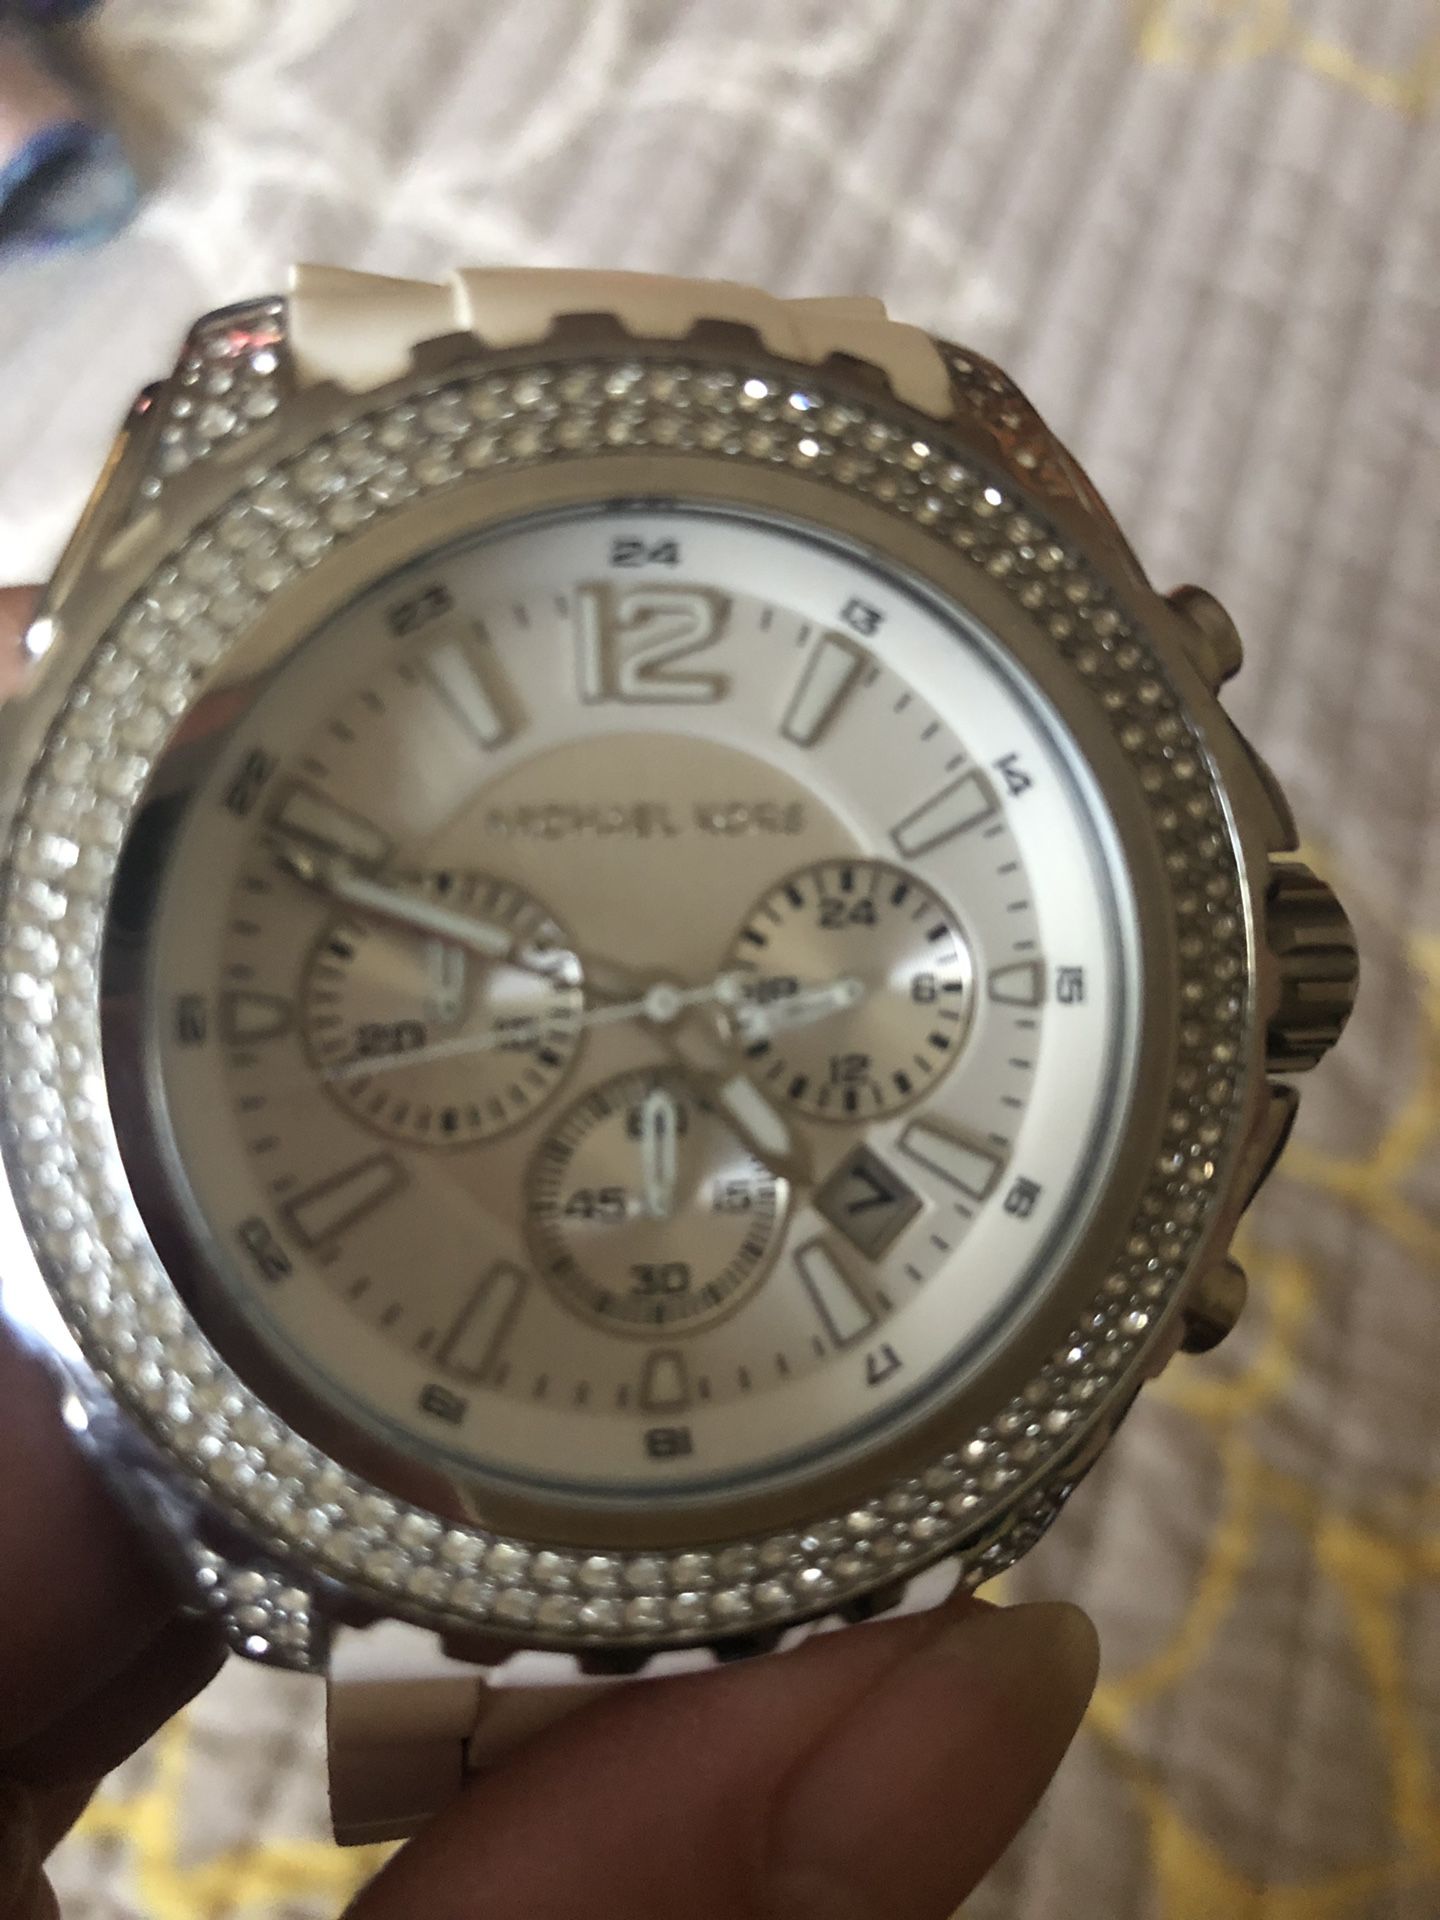 MK WATCH, NO EXTRA - LINKS SIZE SMALL